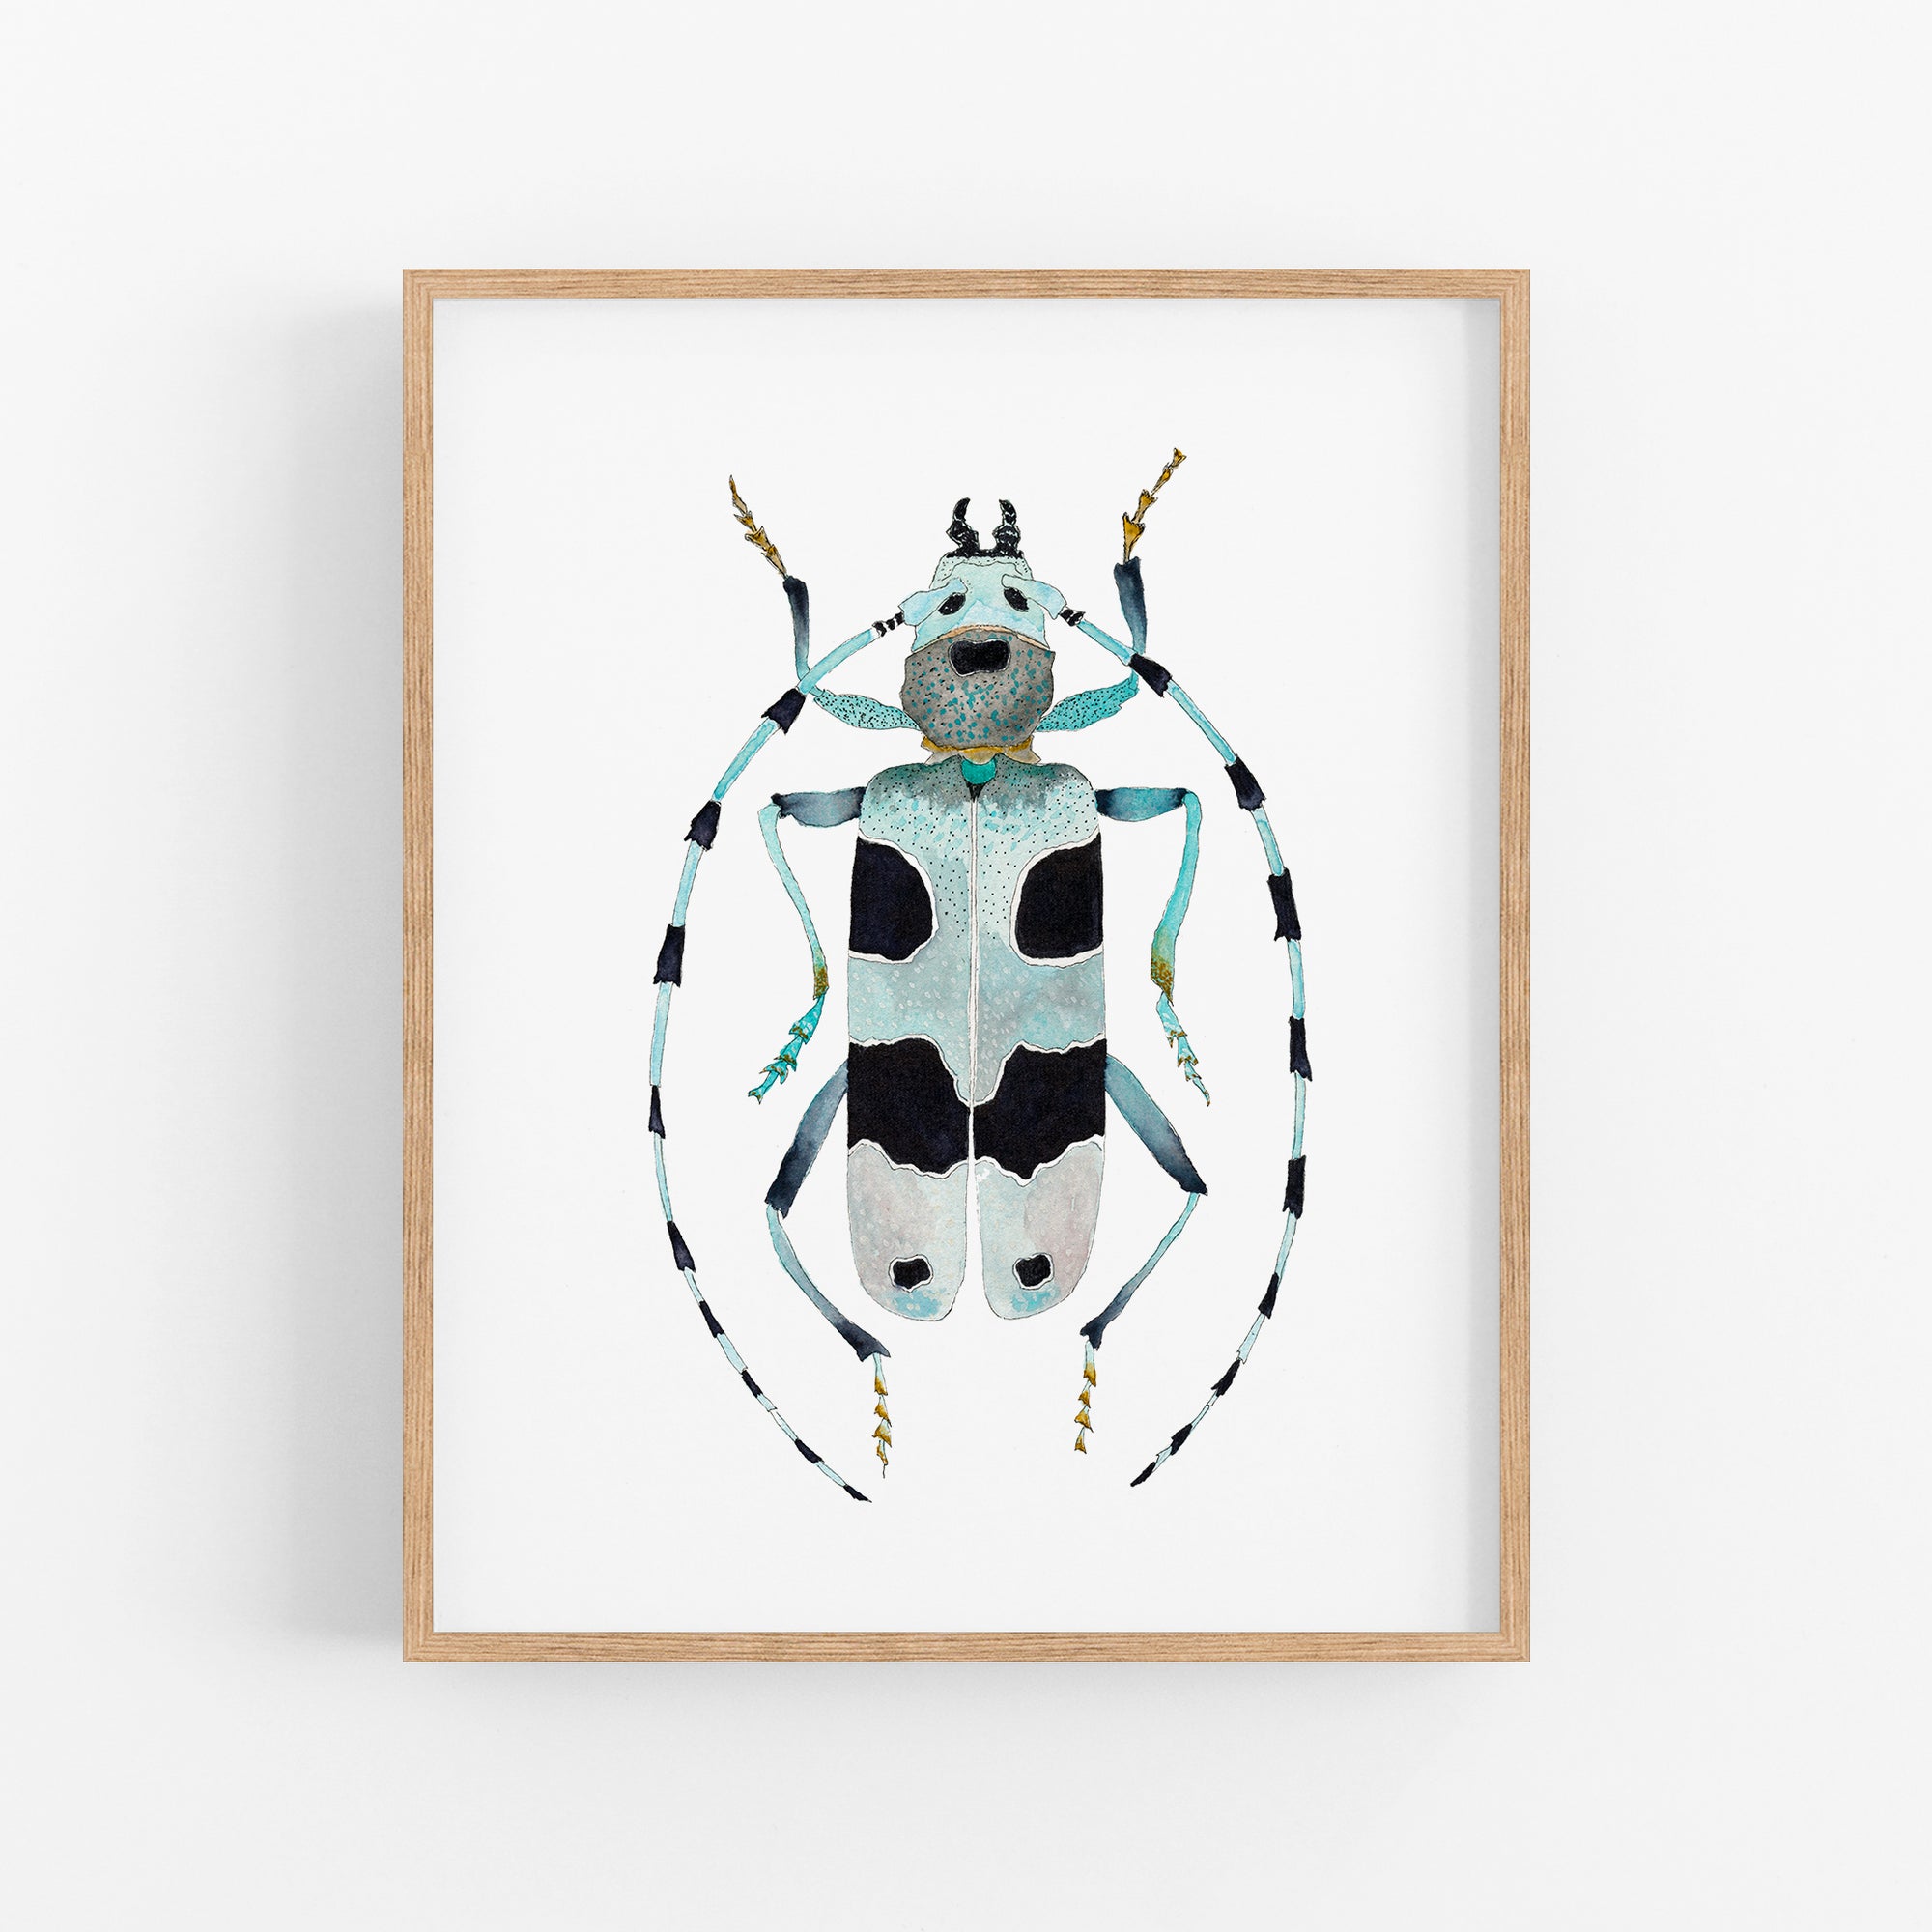 a picture of a bug on a white wall